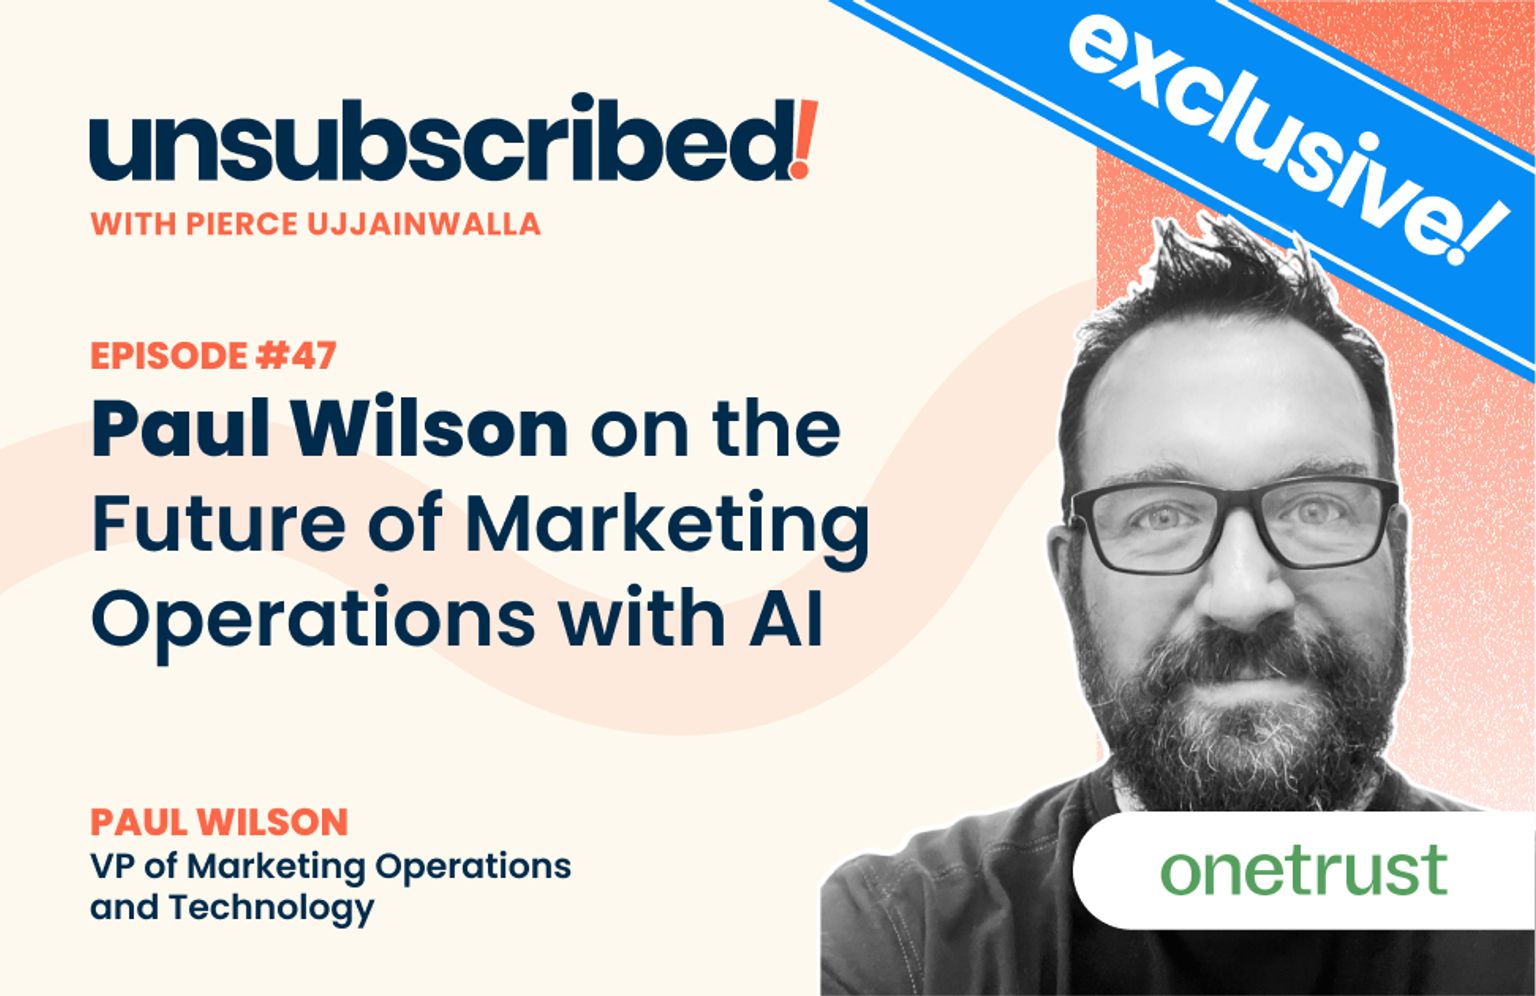 #47 Paul Wilson on the Future of Marketing Operations with AI